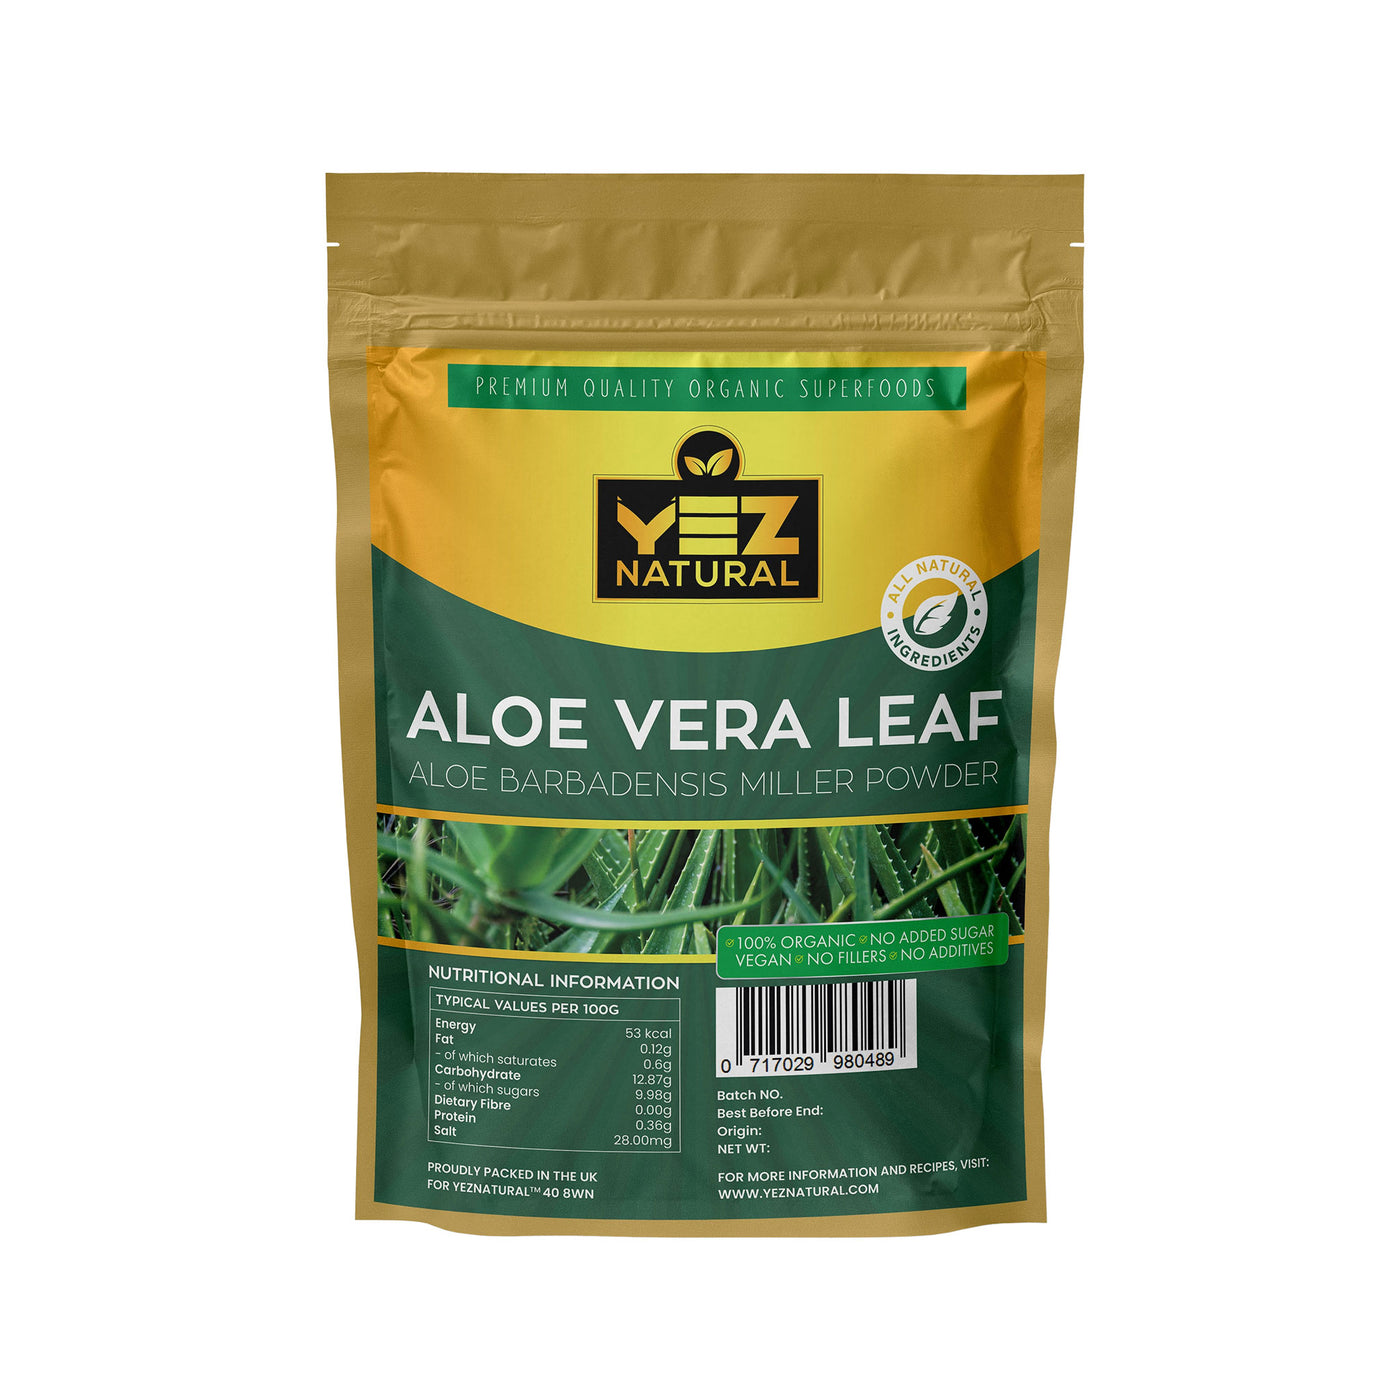 Aloe Vera powder is made by grinding the dried leaves. Organic Aloe Vera powder is useful for skin and hair. Aloe Vera leaves powder has antioxidant and antibacterial properties that are effective in moisturizing the skin and acne scar treatment.